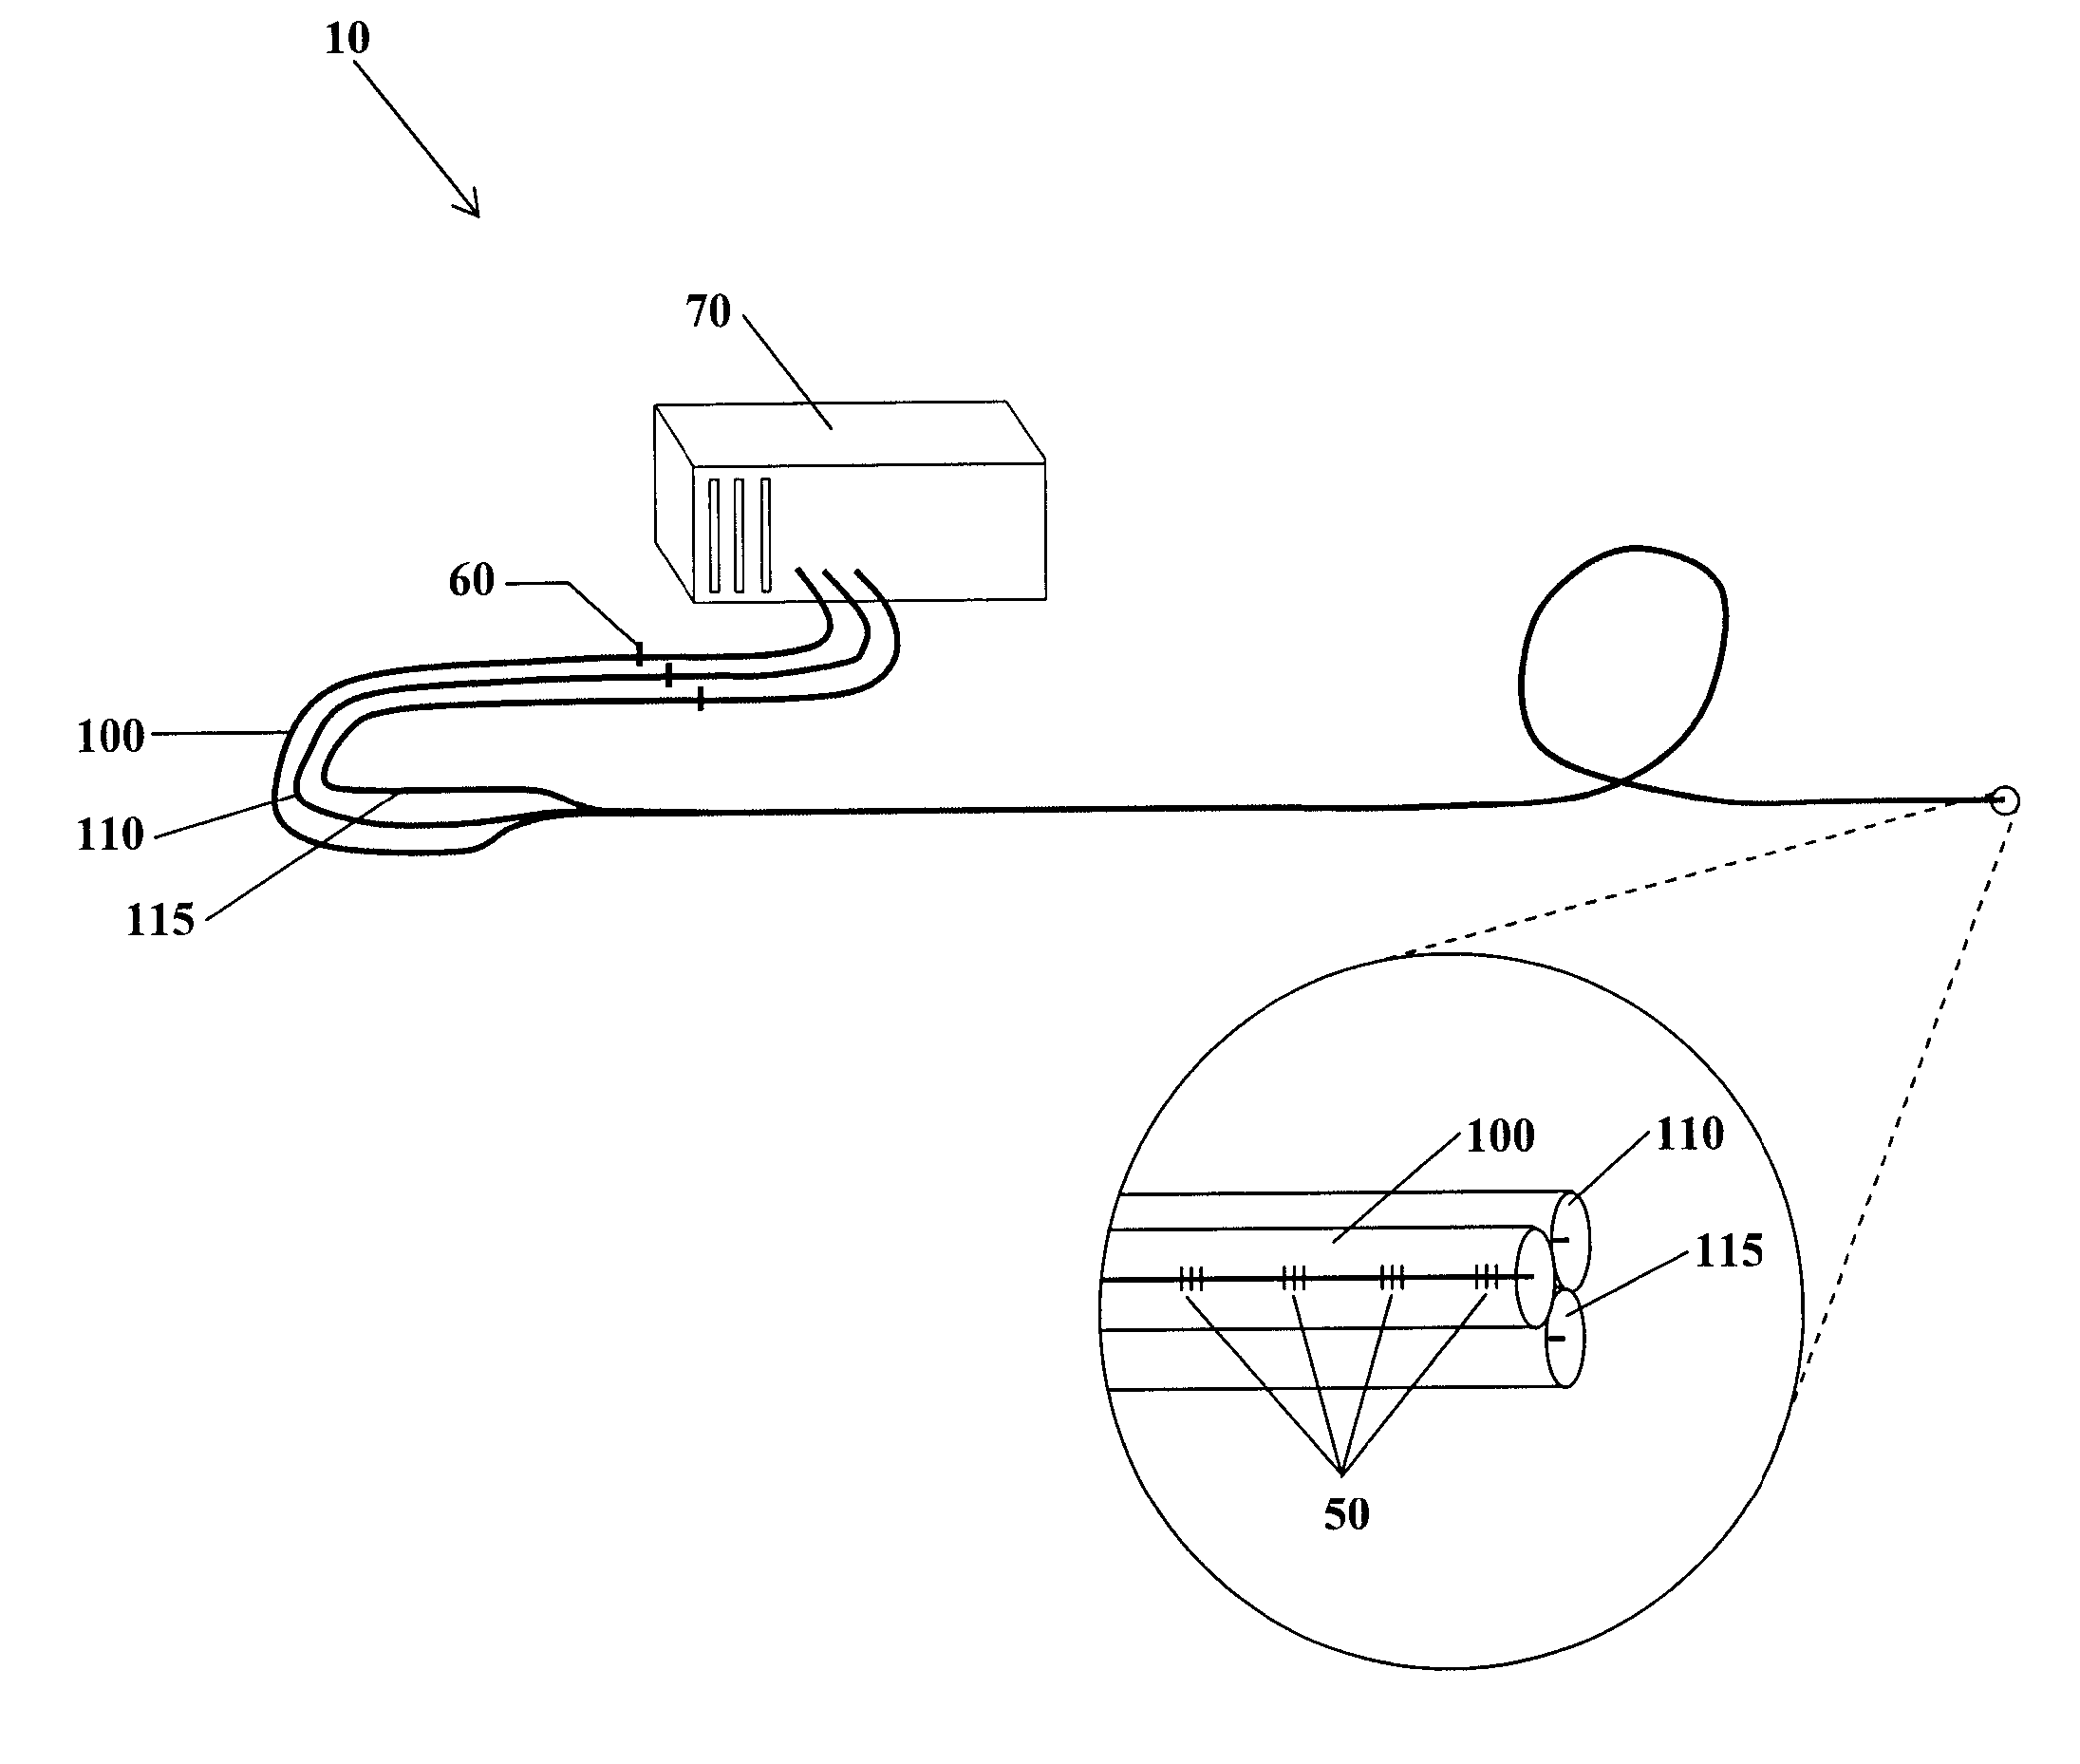 Fiber optic position and shape sensing device and method relating thereto